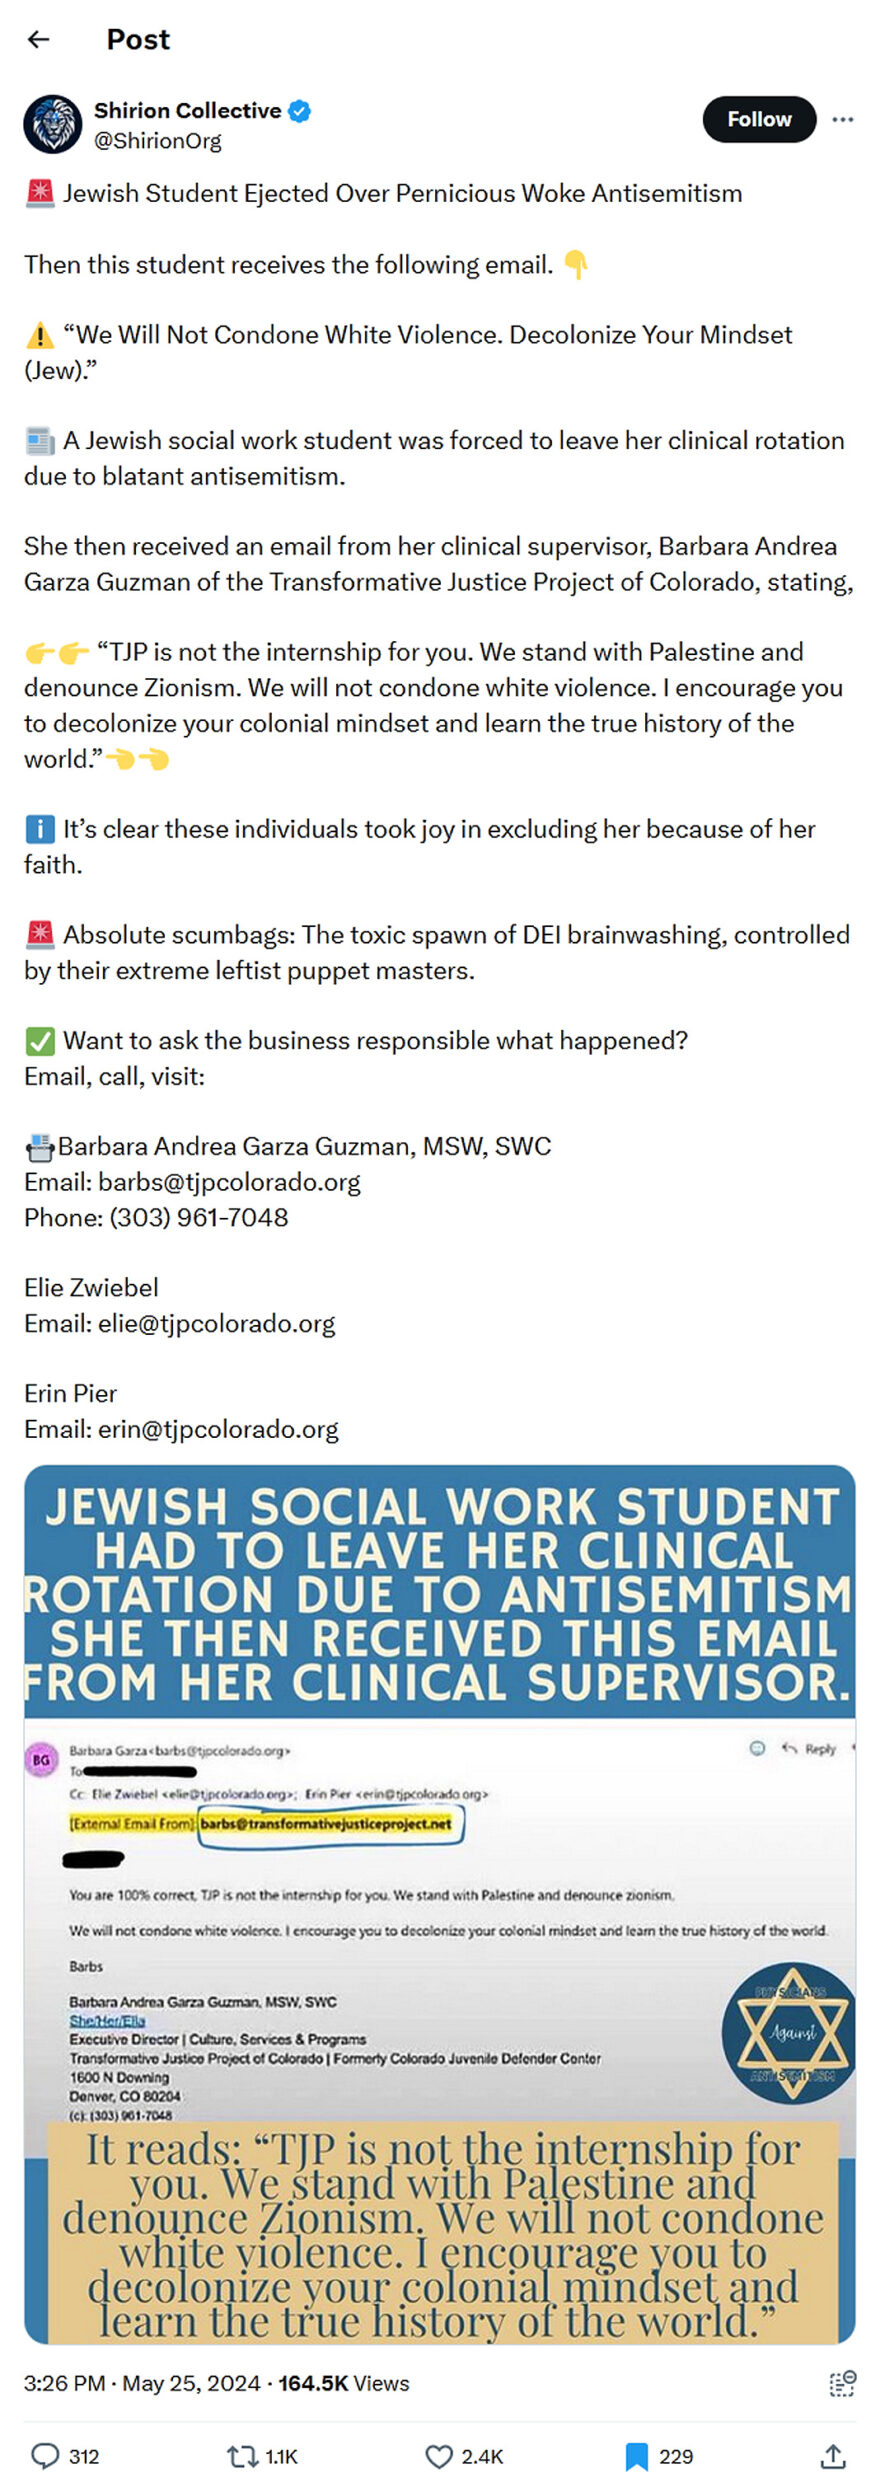 Shirion Collective-tweet-25May2024-Jewish Student Ejected Over Woke Antisemitism